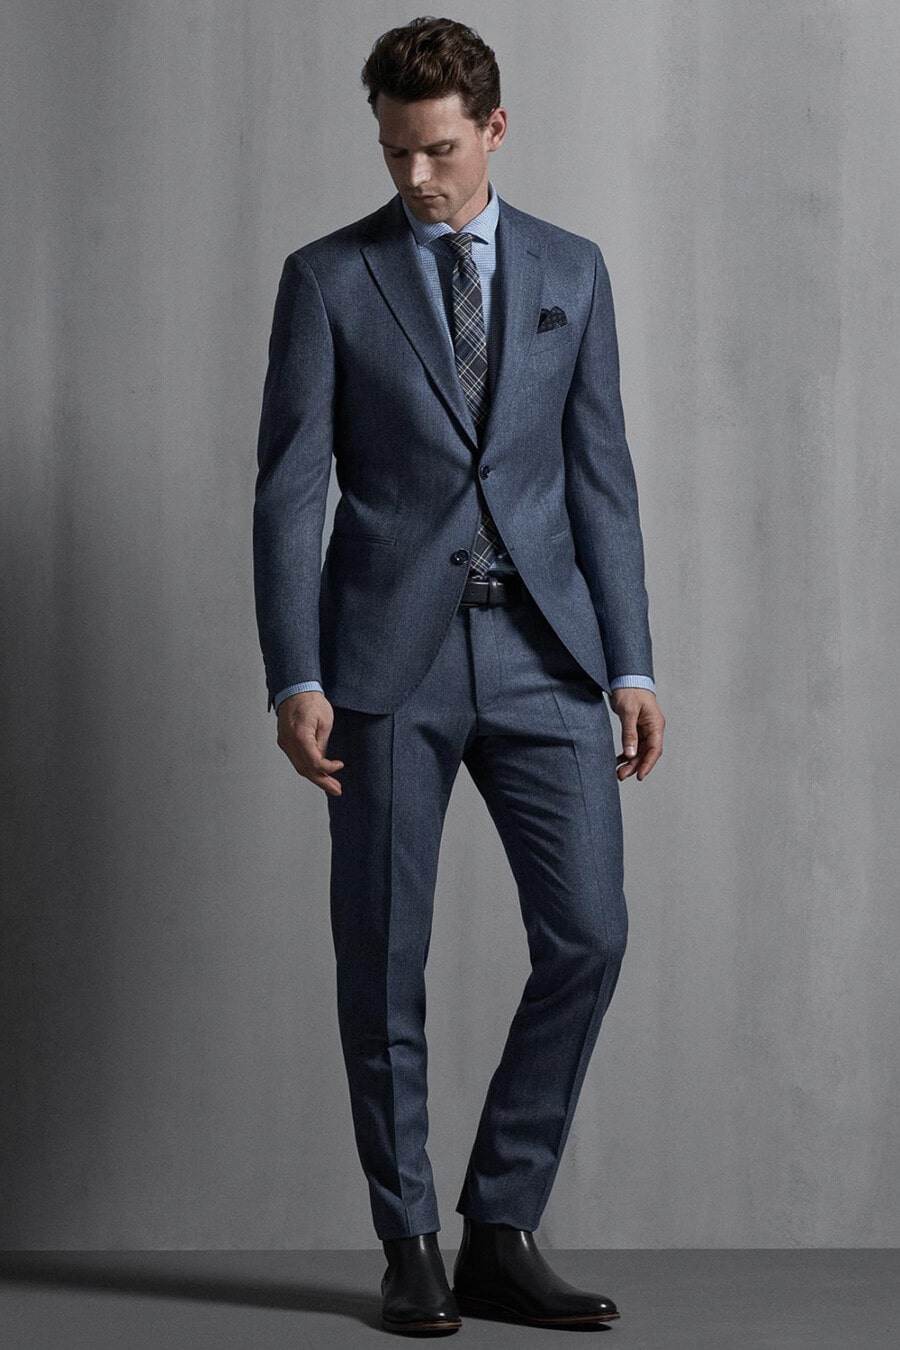 Men's Grey-blue suit, light blue shirt, grey check tie and black leather Chelsea boots